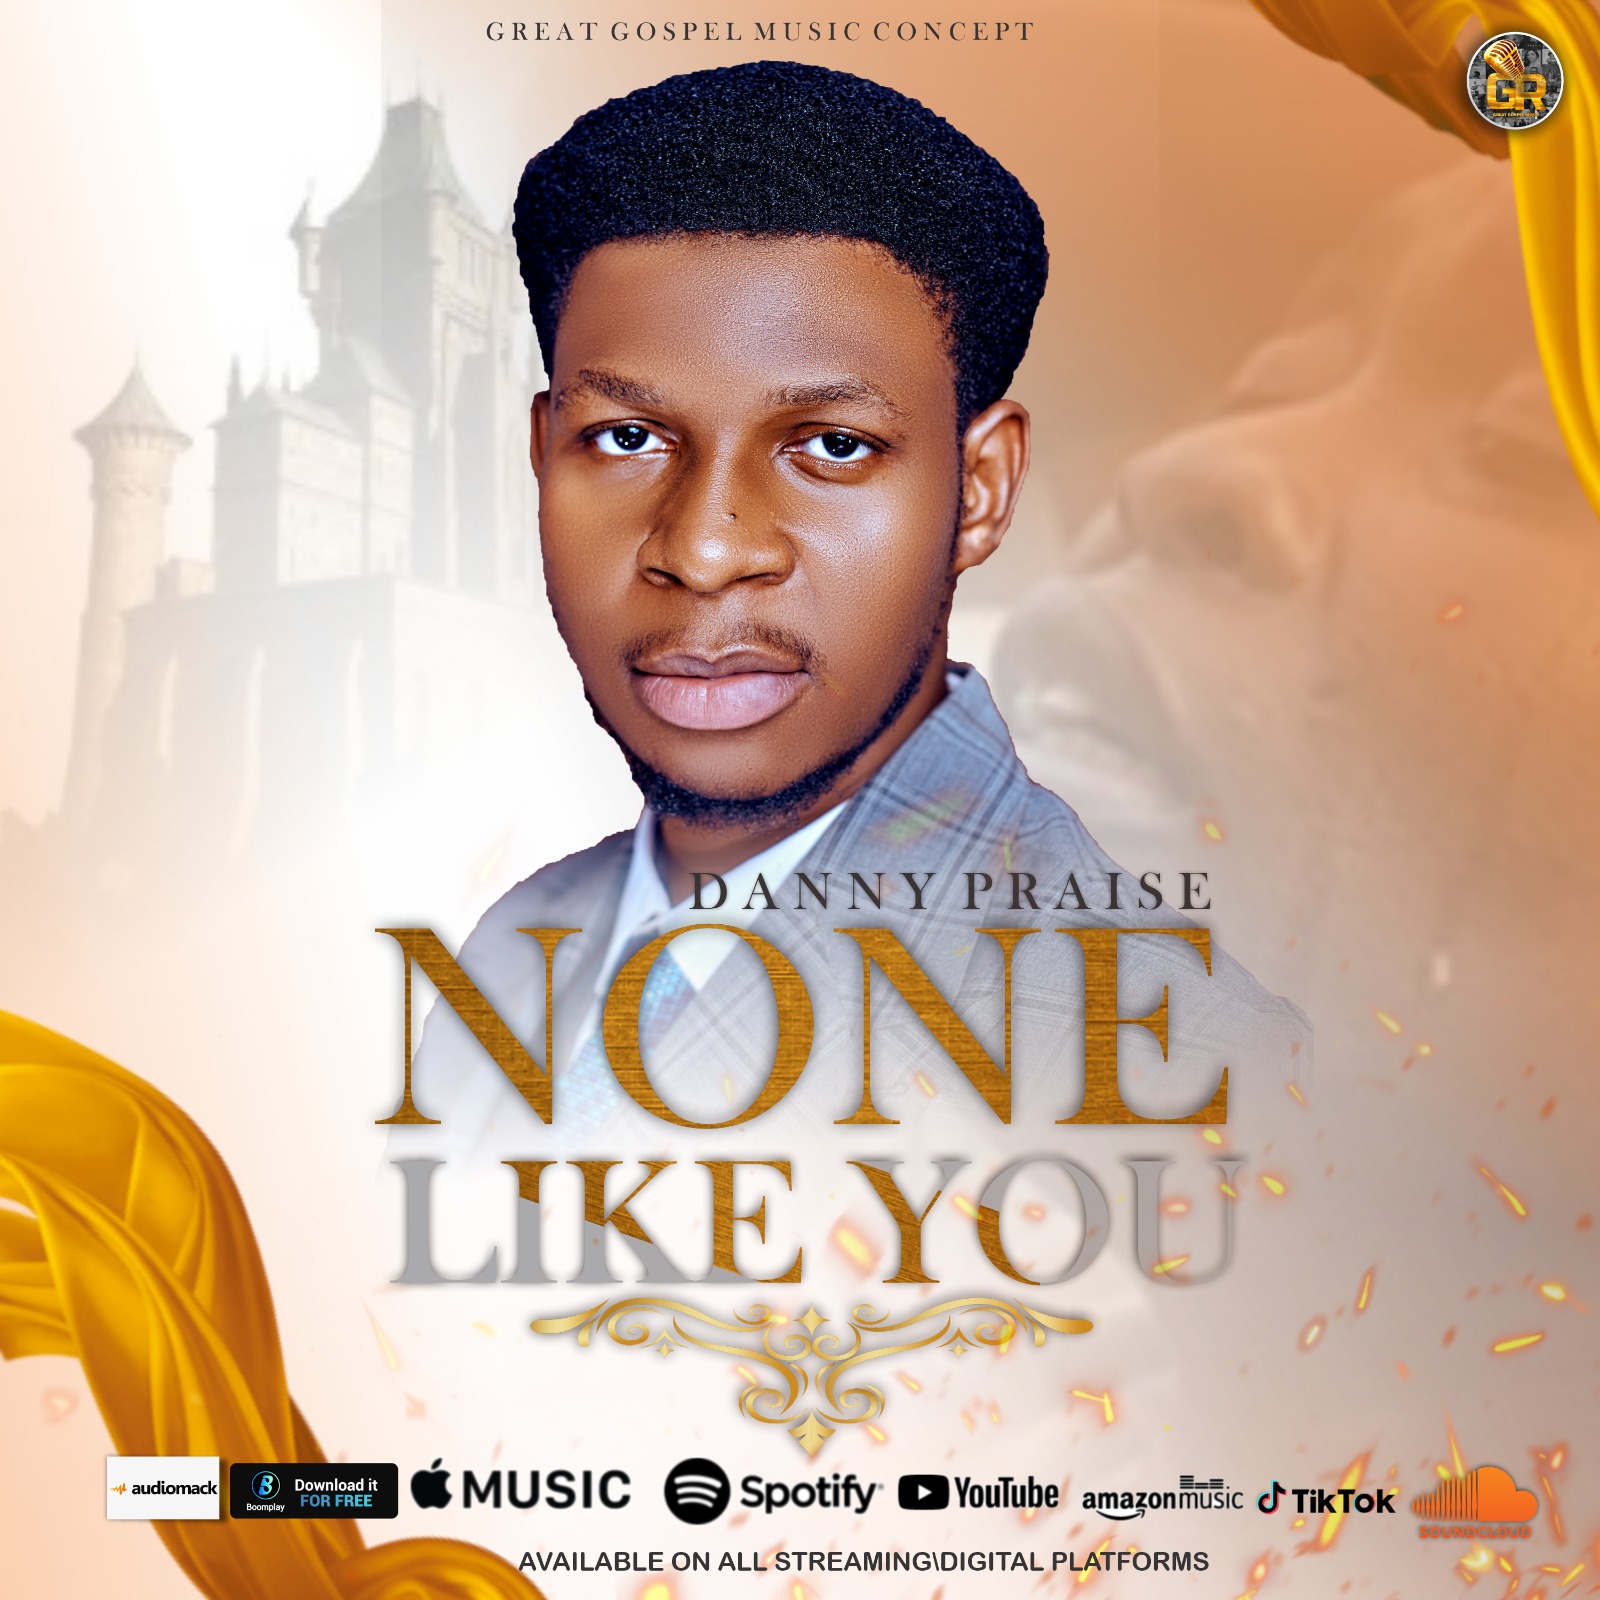 None Like You by Danny Praise